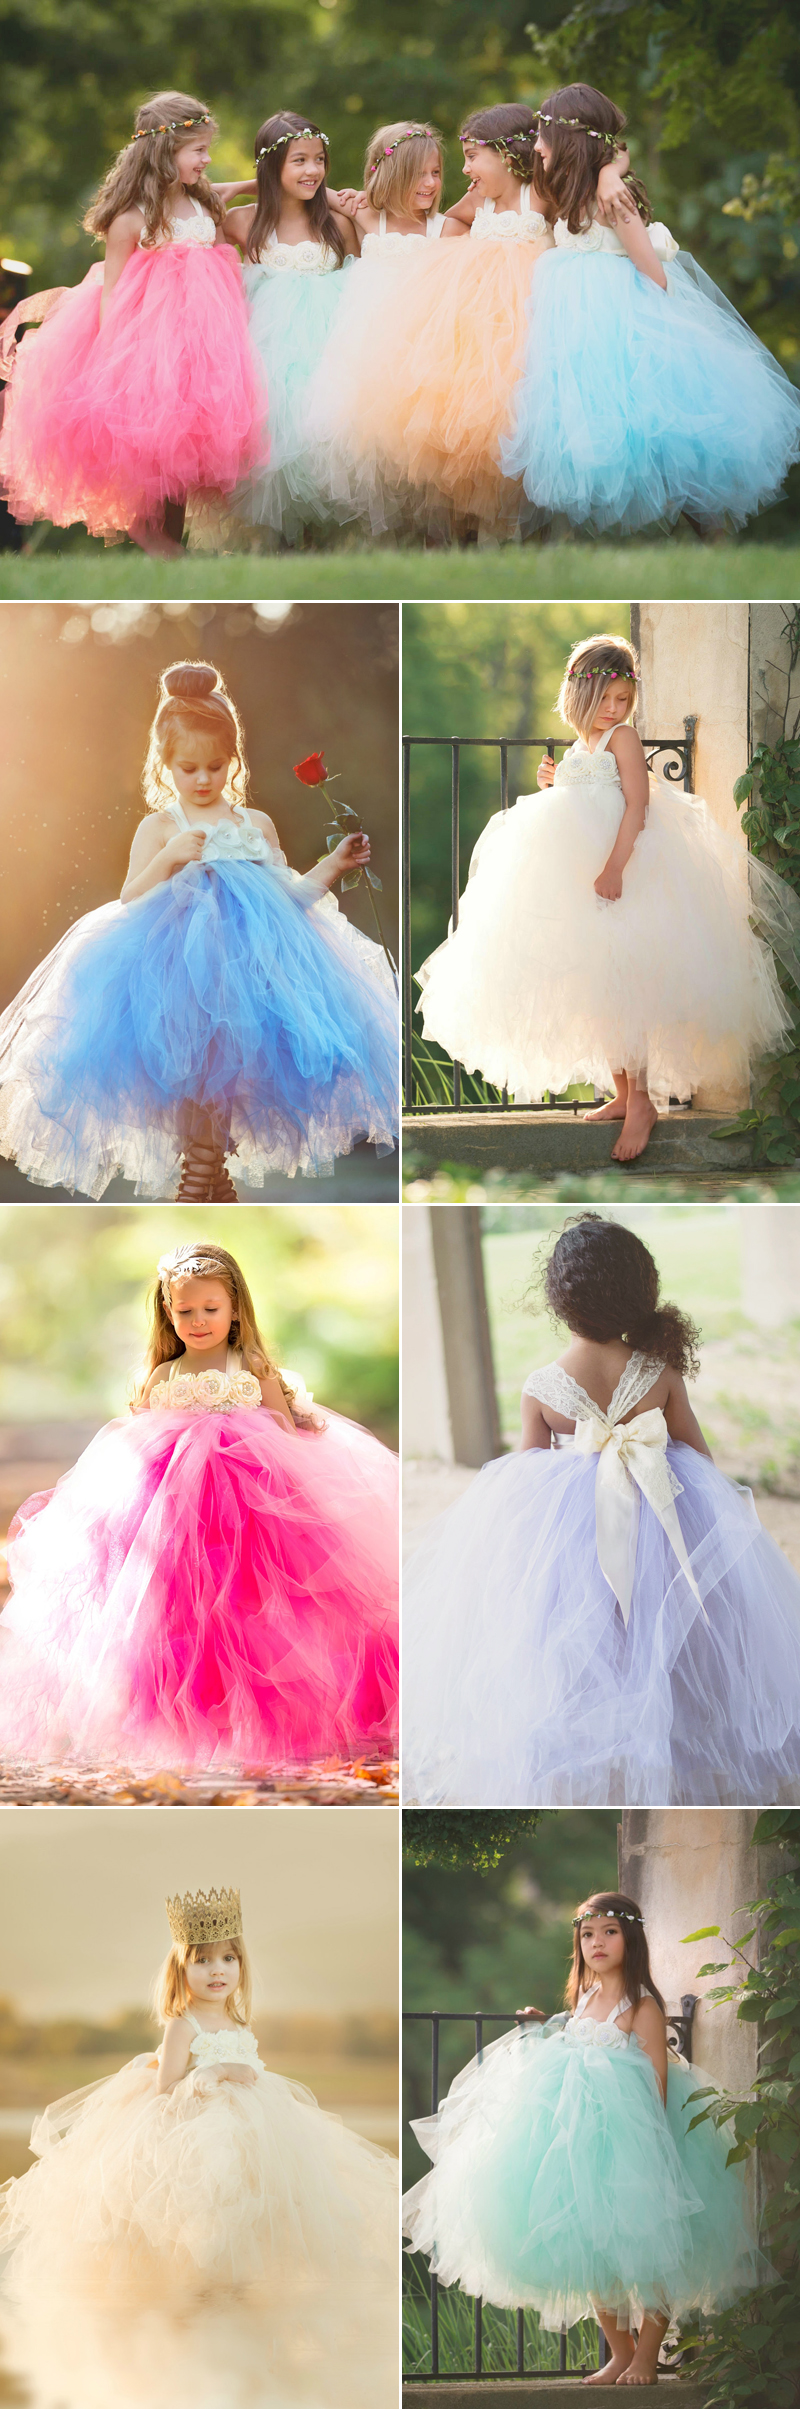 34 Cute Flower Girl Dresses That Are Too Adorable for Words